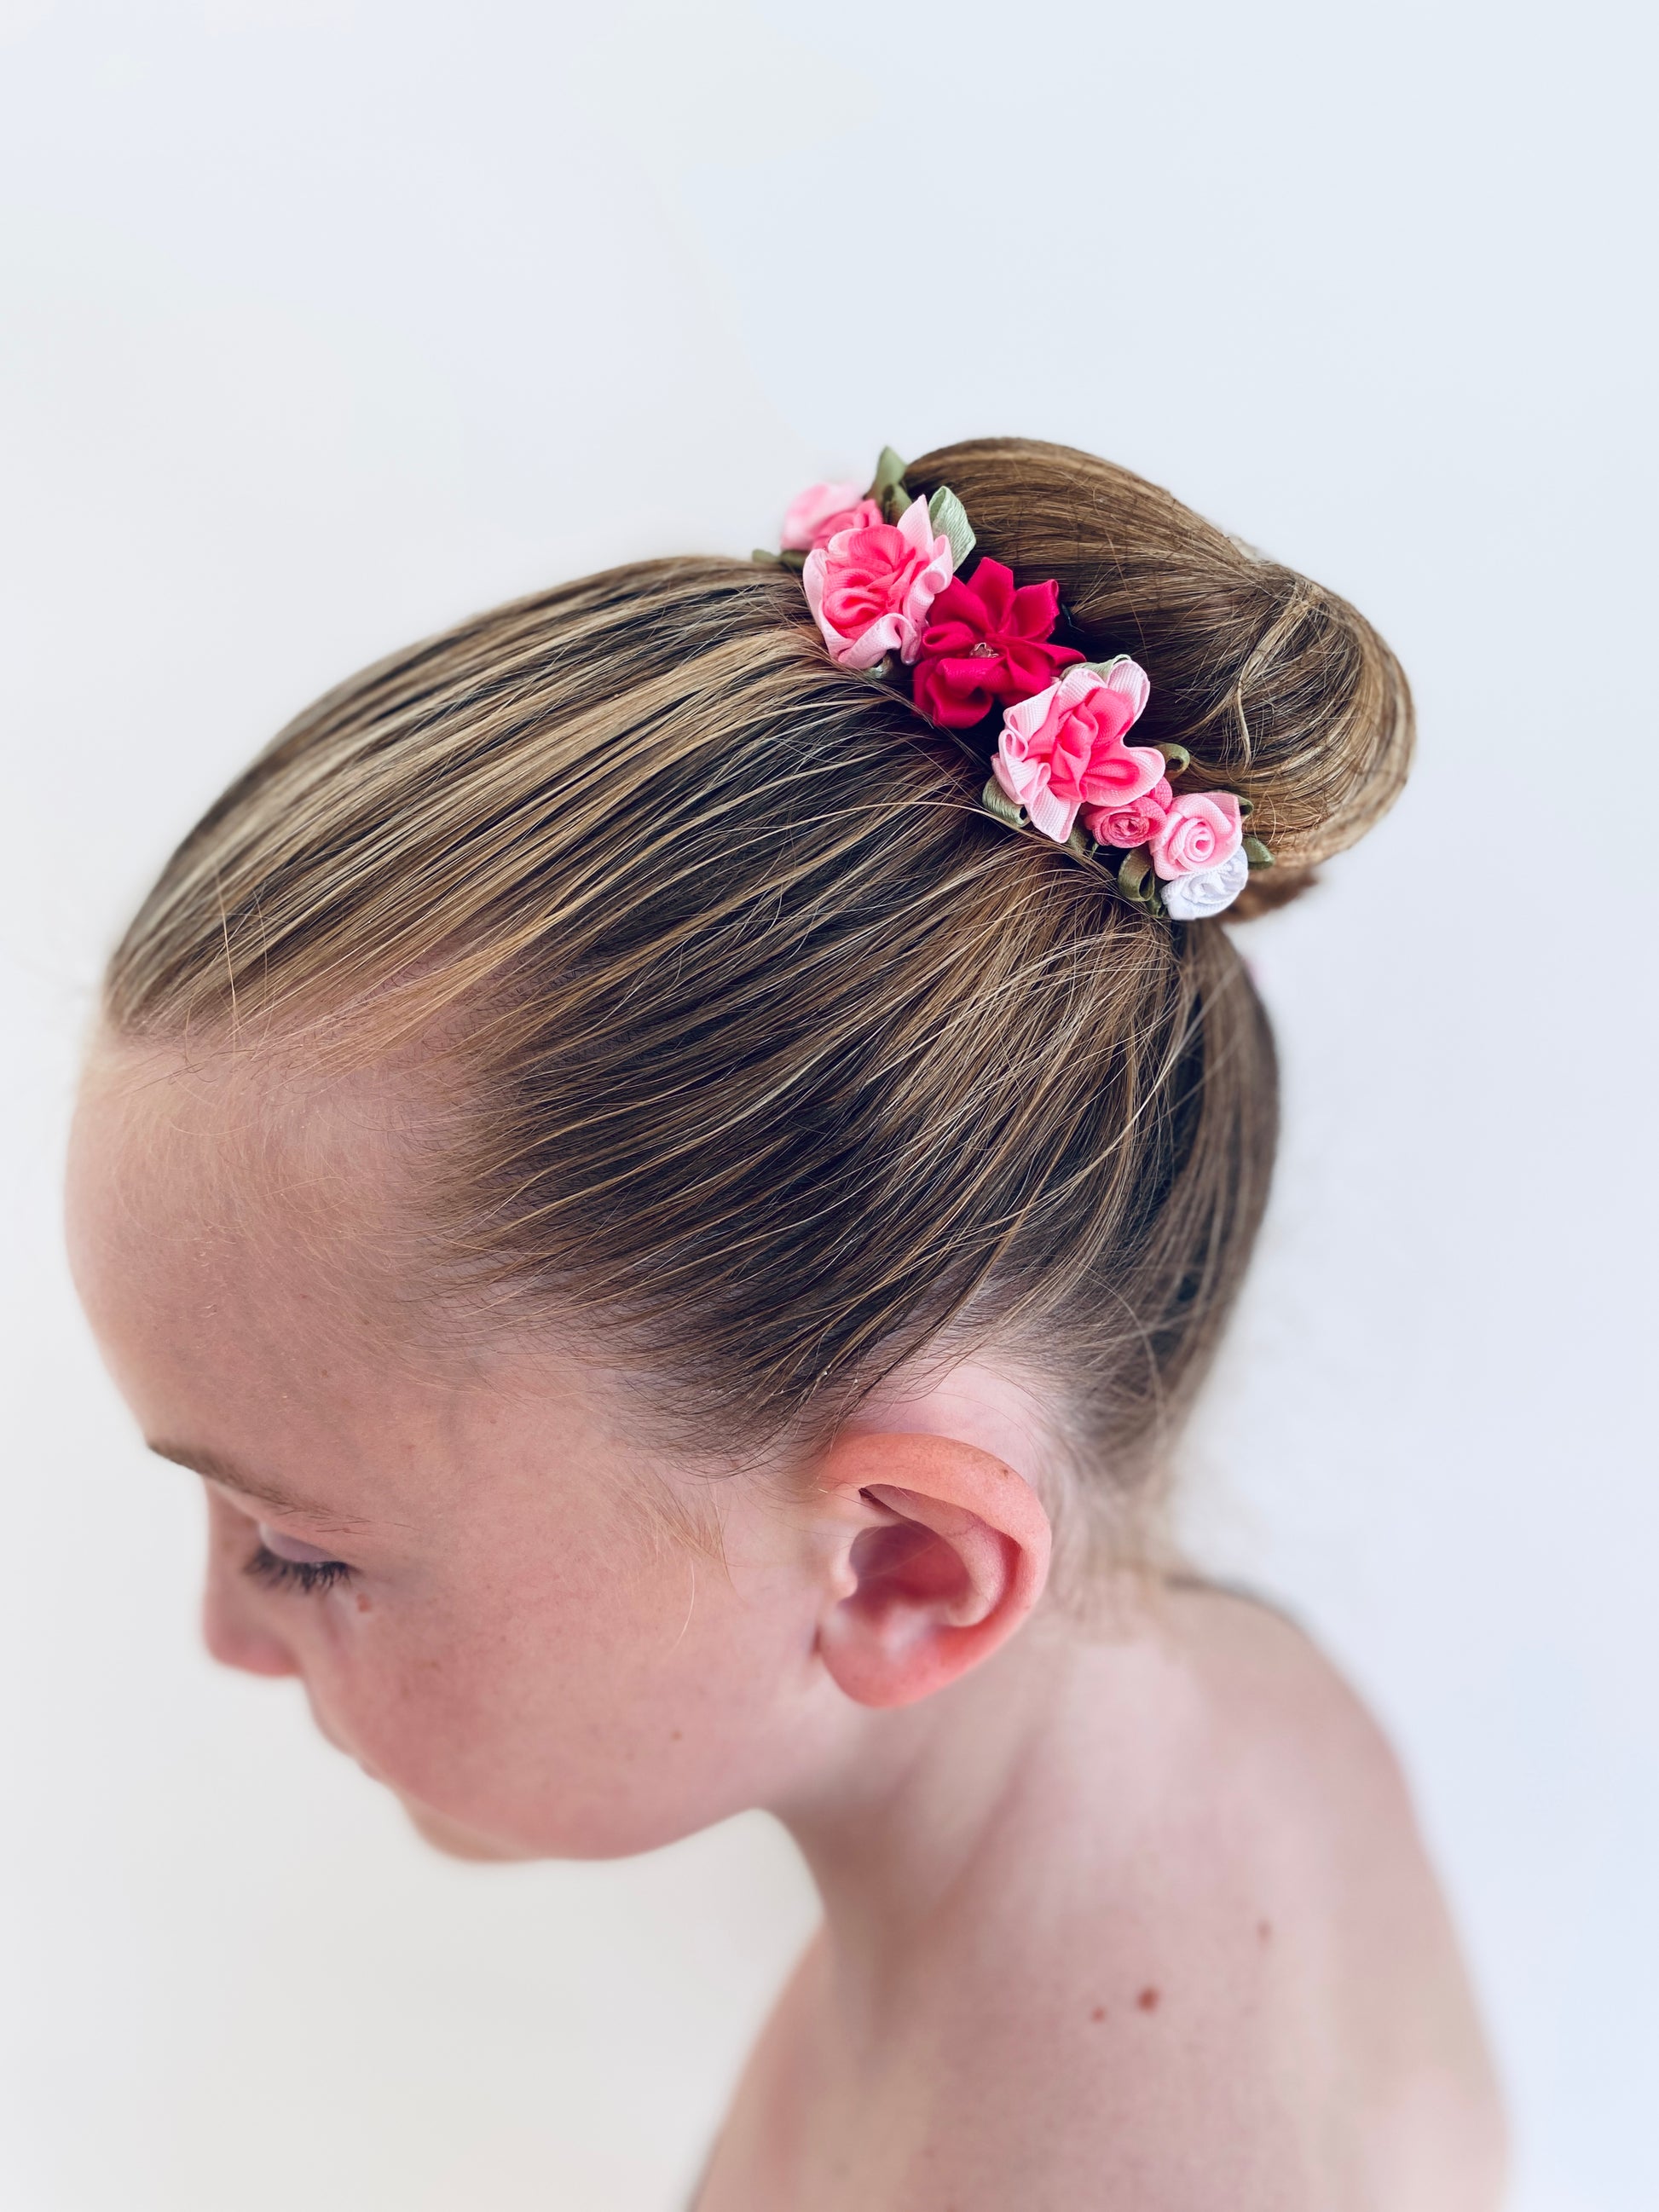 Bunwrap / hair accessory for your ballet bun from The Collective Dancewear in pink and white